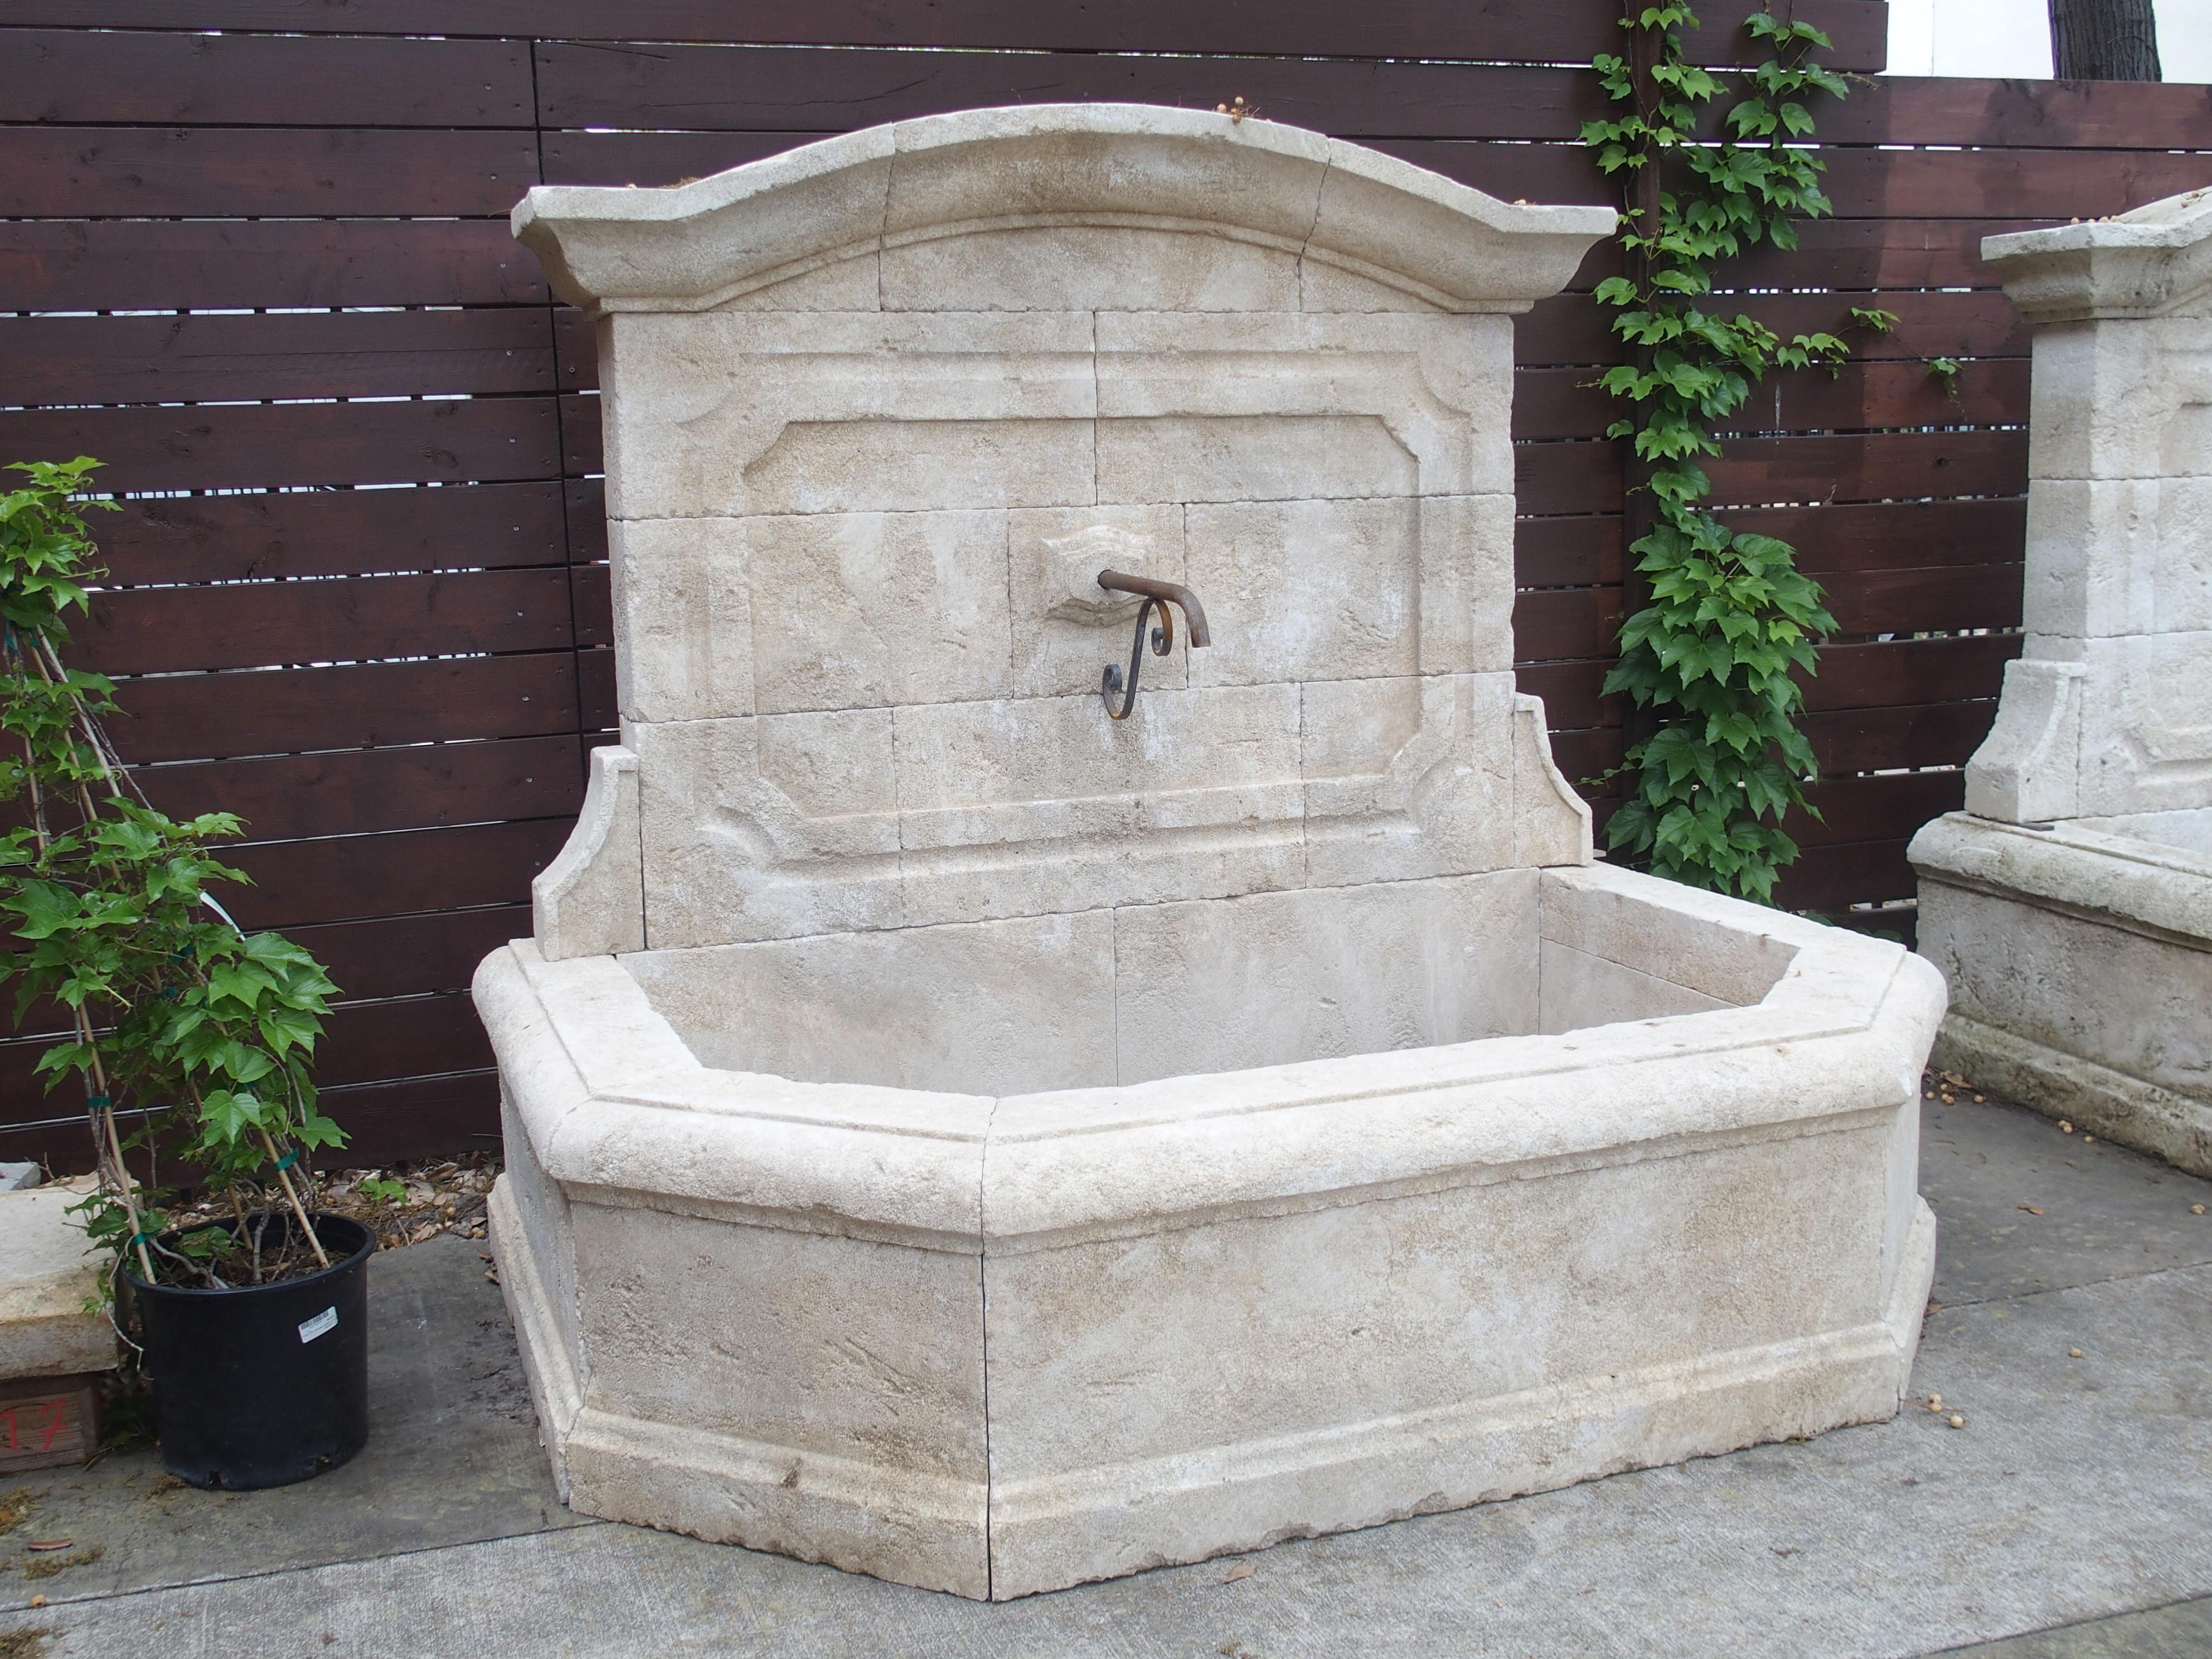 Comprised of 25 pieces of stone, this limestone wall fountain was hand-carved in Provence, France, in the 2000’s. The large half-octagonal basin (comprised of 12 stones, including five capstones) features thick quarter round top edges coupled with a